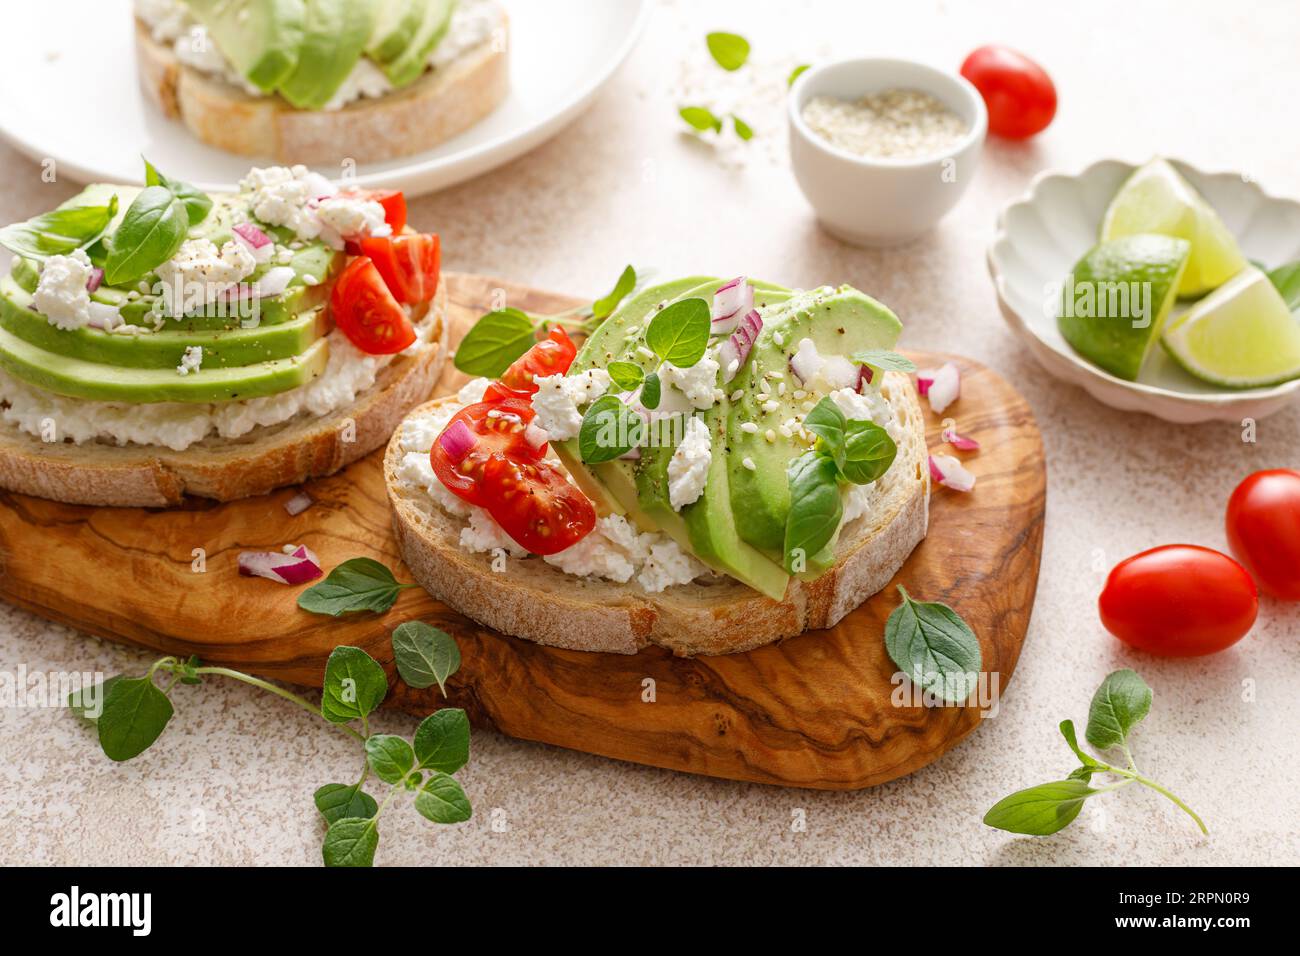 Avocado toast with cheese cottage, tomato and herbs for breakfast Stock Photo